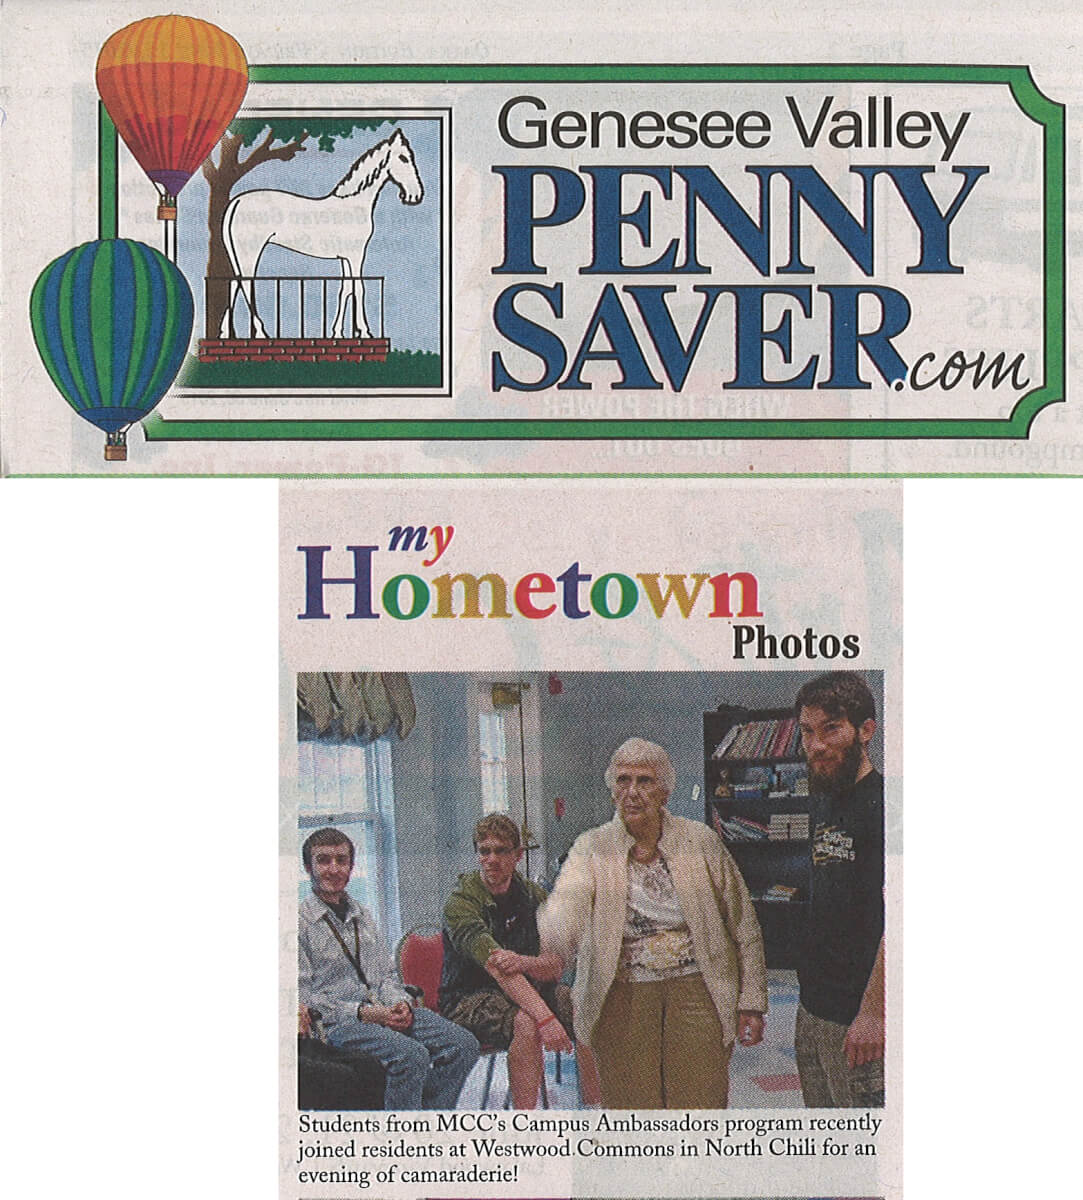 Westwood Commons and MCC Ambassadors Photos in the Genesee Valley Penny Saver June 12, 2015